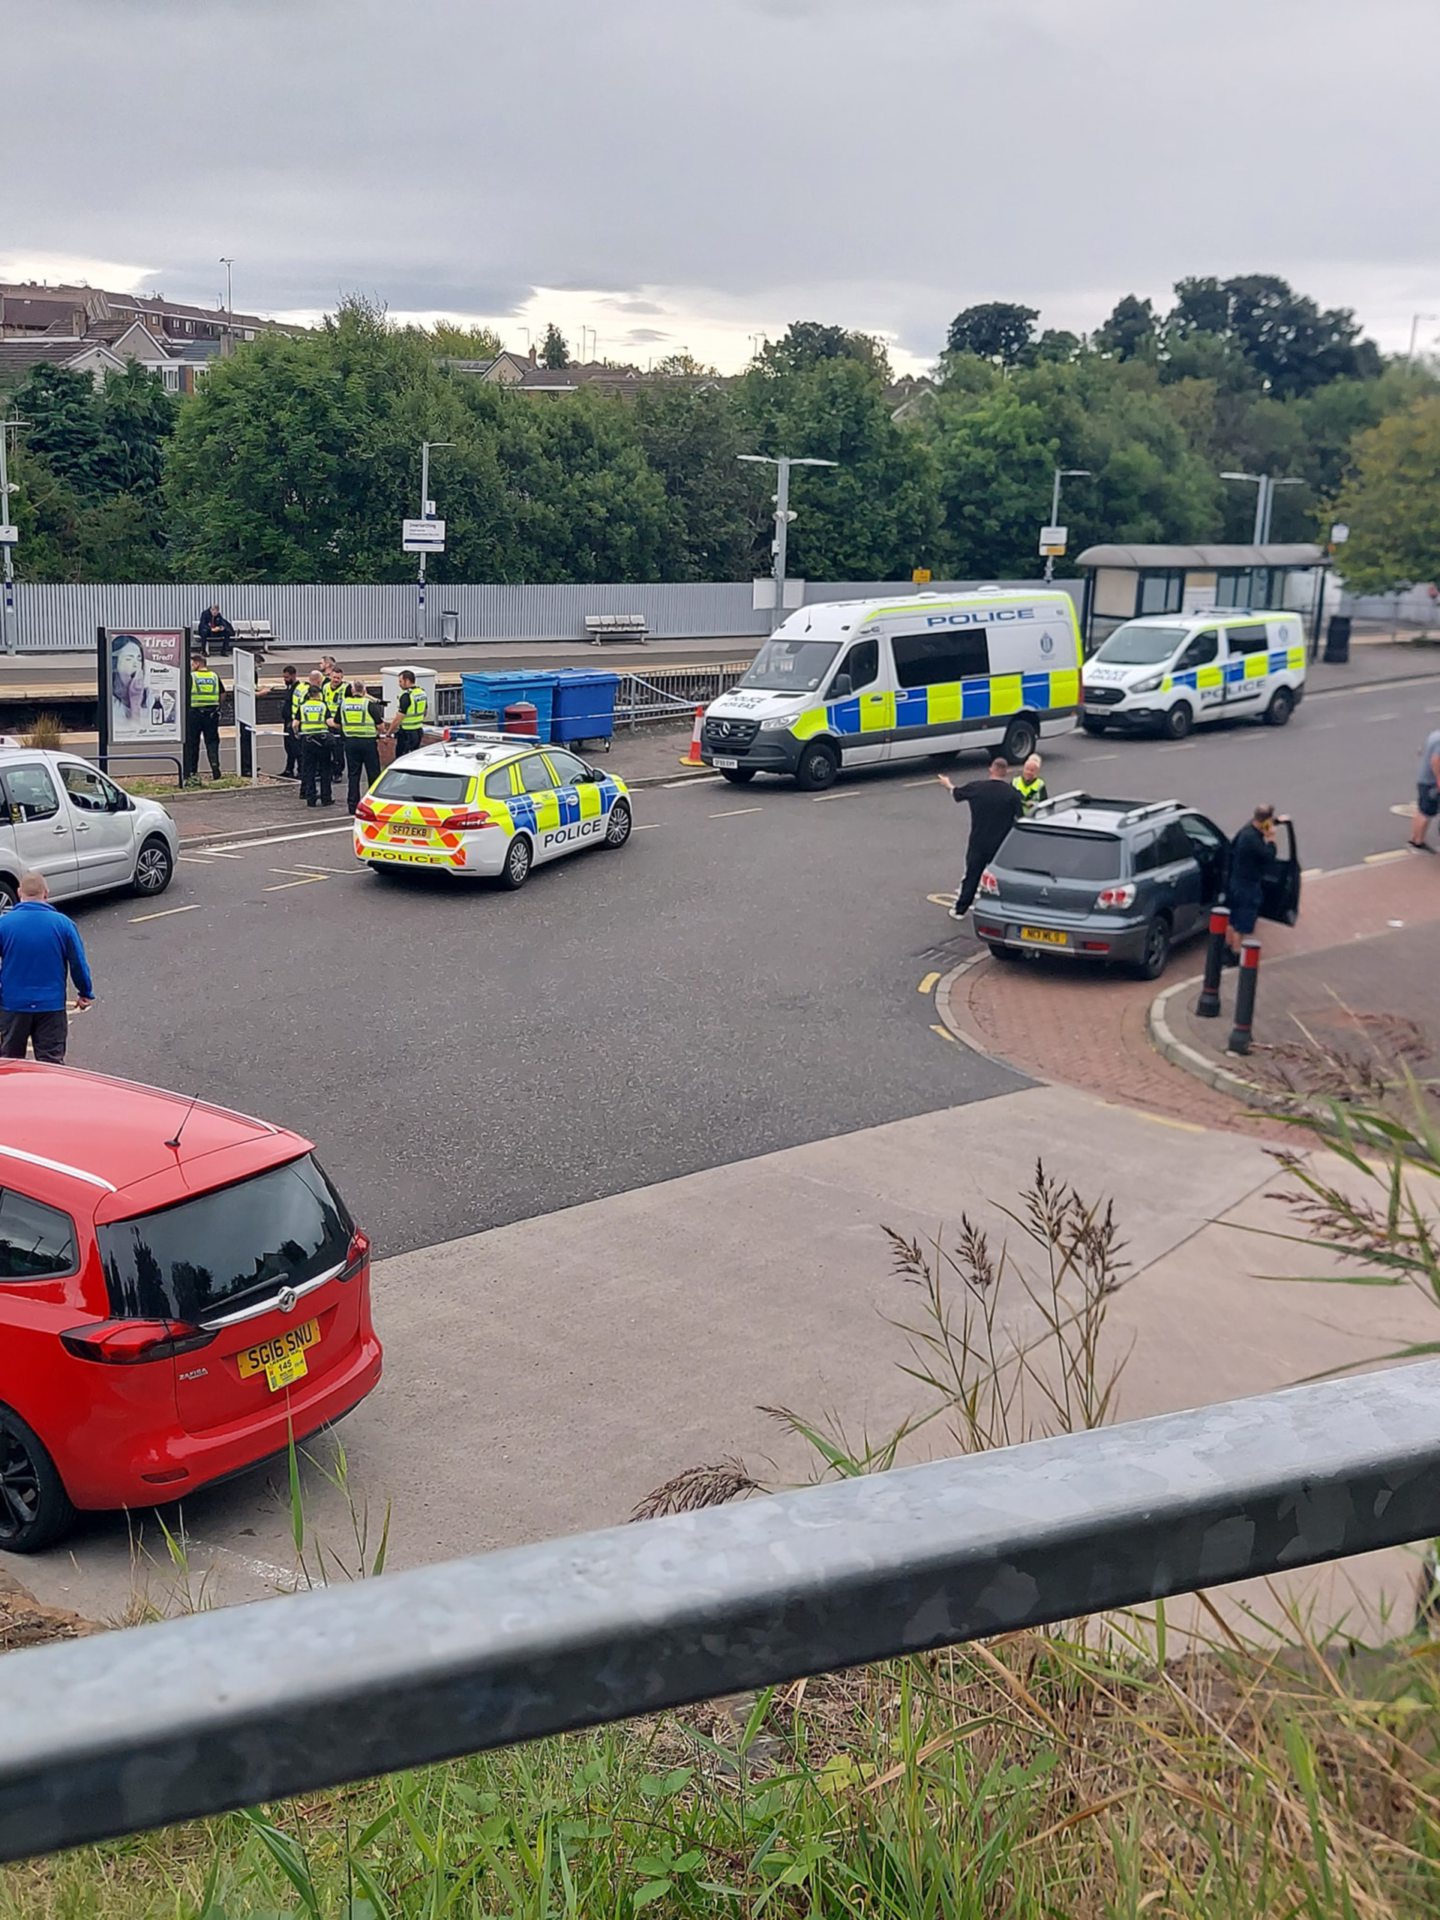 Police sealed off part of Inverkeithing train station as an investigation got under way. Picture: Sarah Myles.